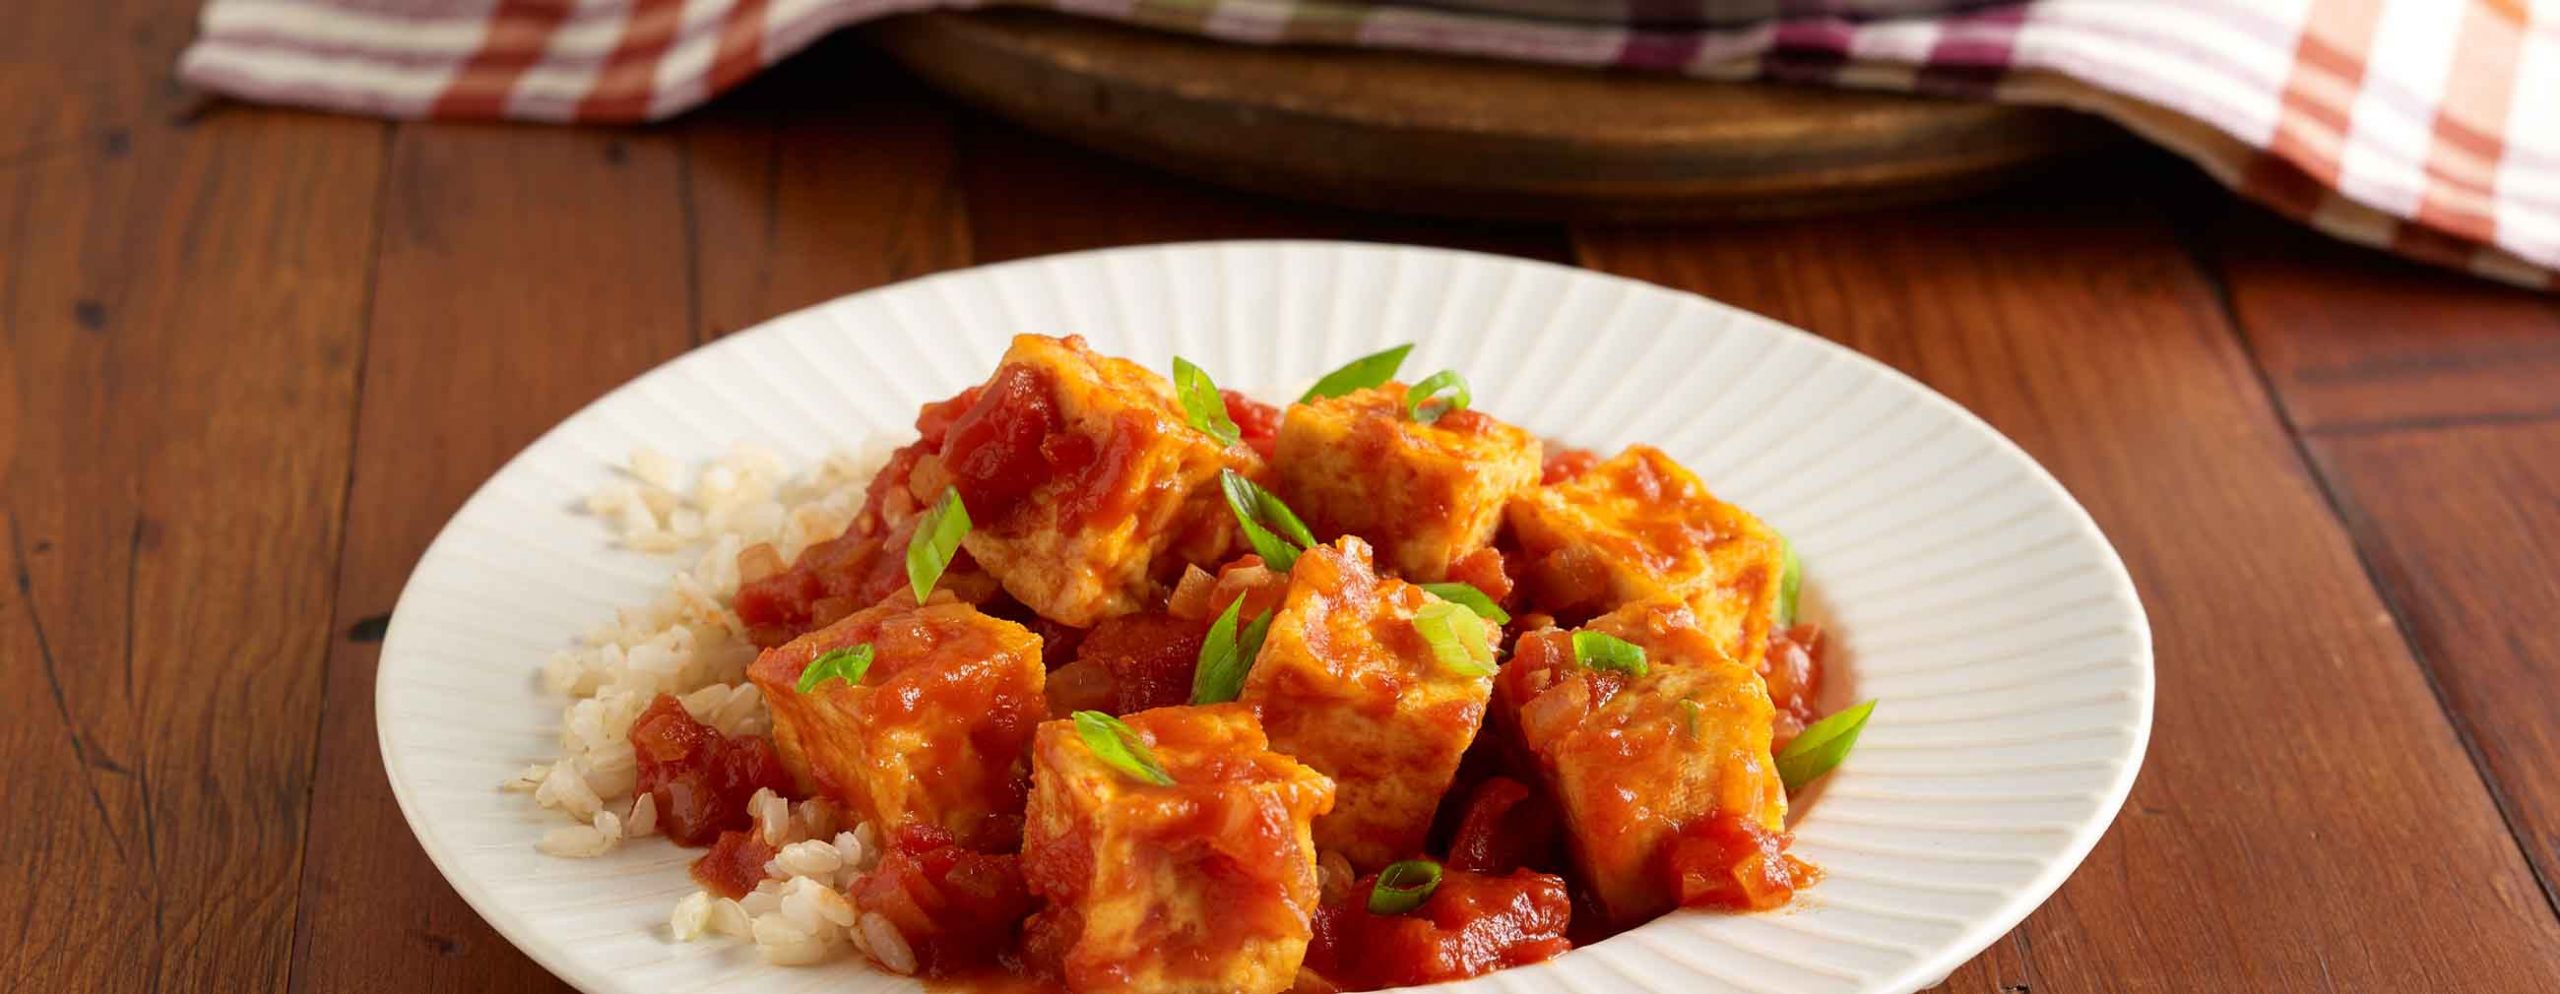 Easy Spicy Tofu Recipes
 Easy Fried Tofu with Spicy Tomato Sauce